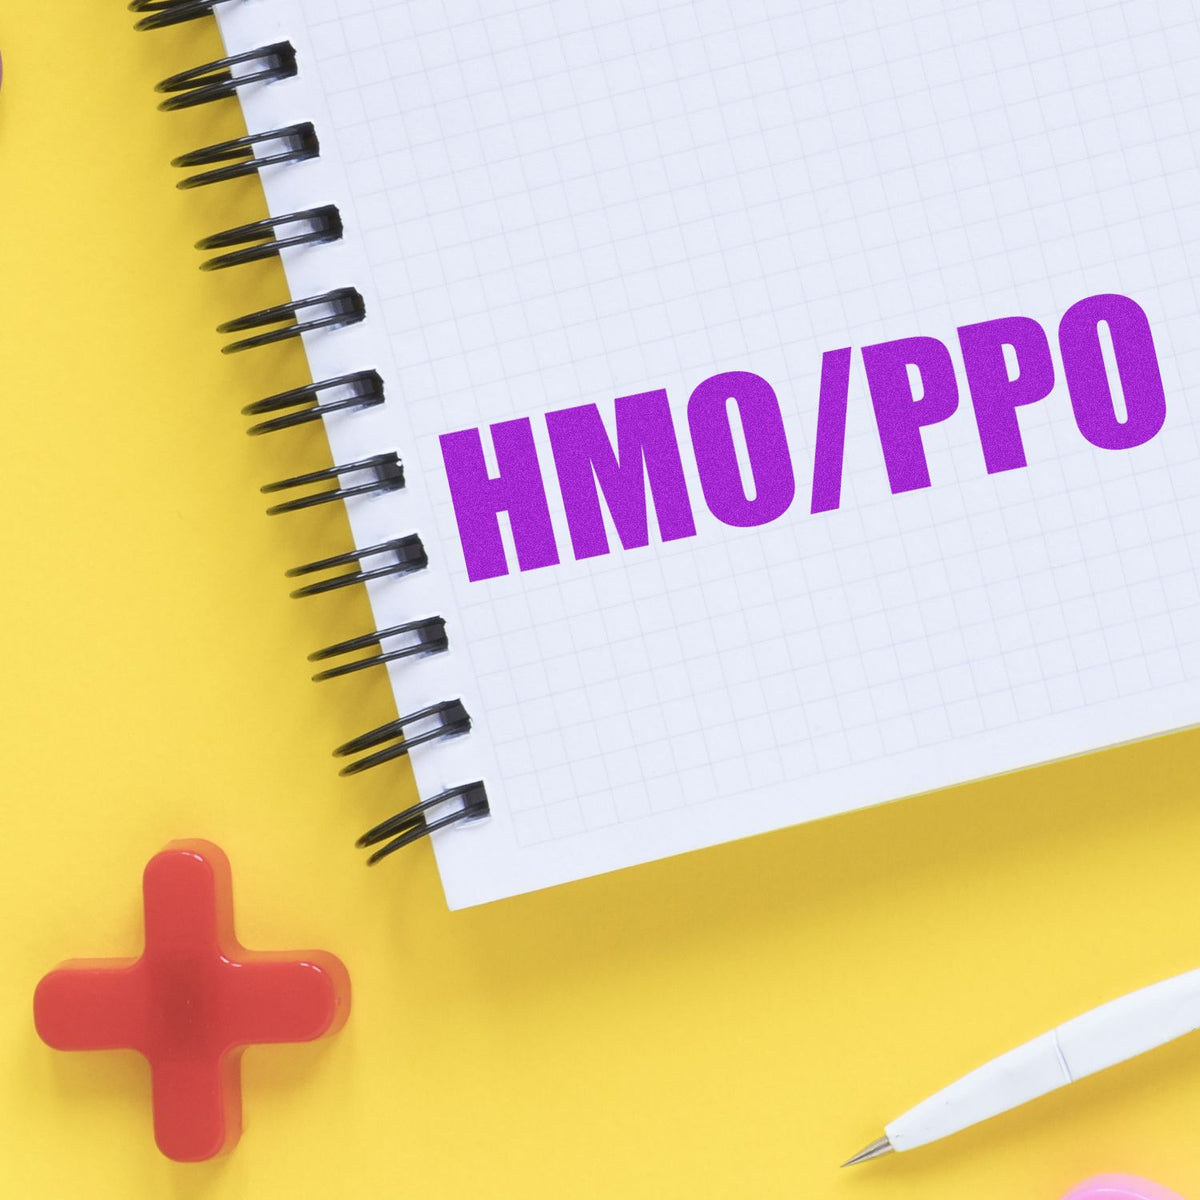 Medical HMO/PPO Rubber Stamp In Use